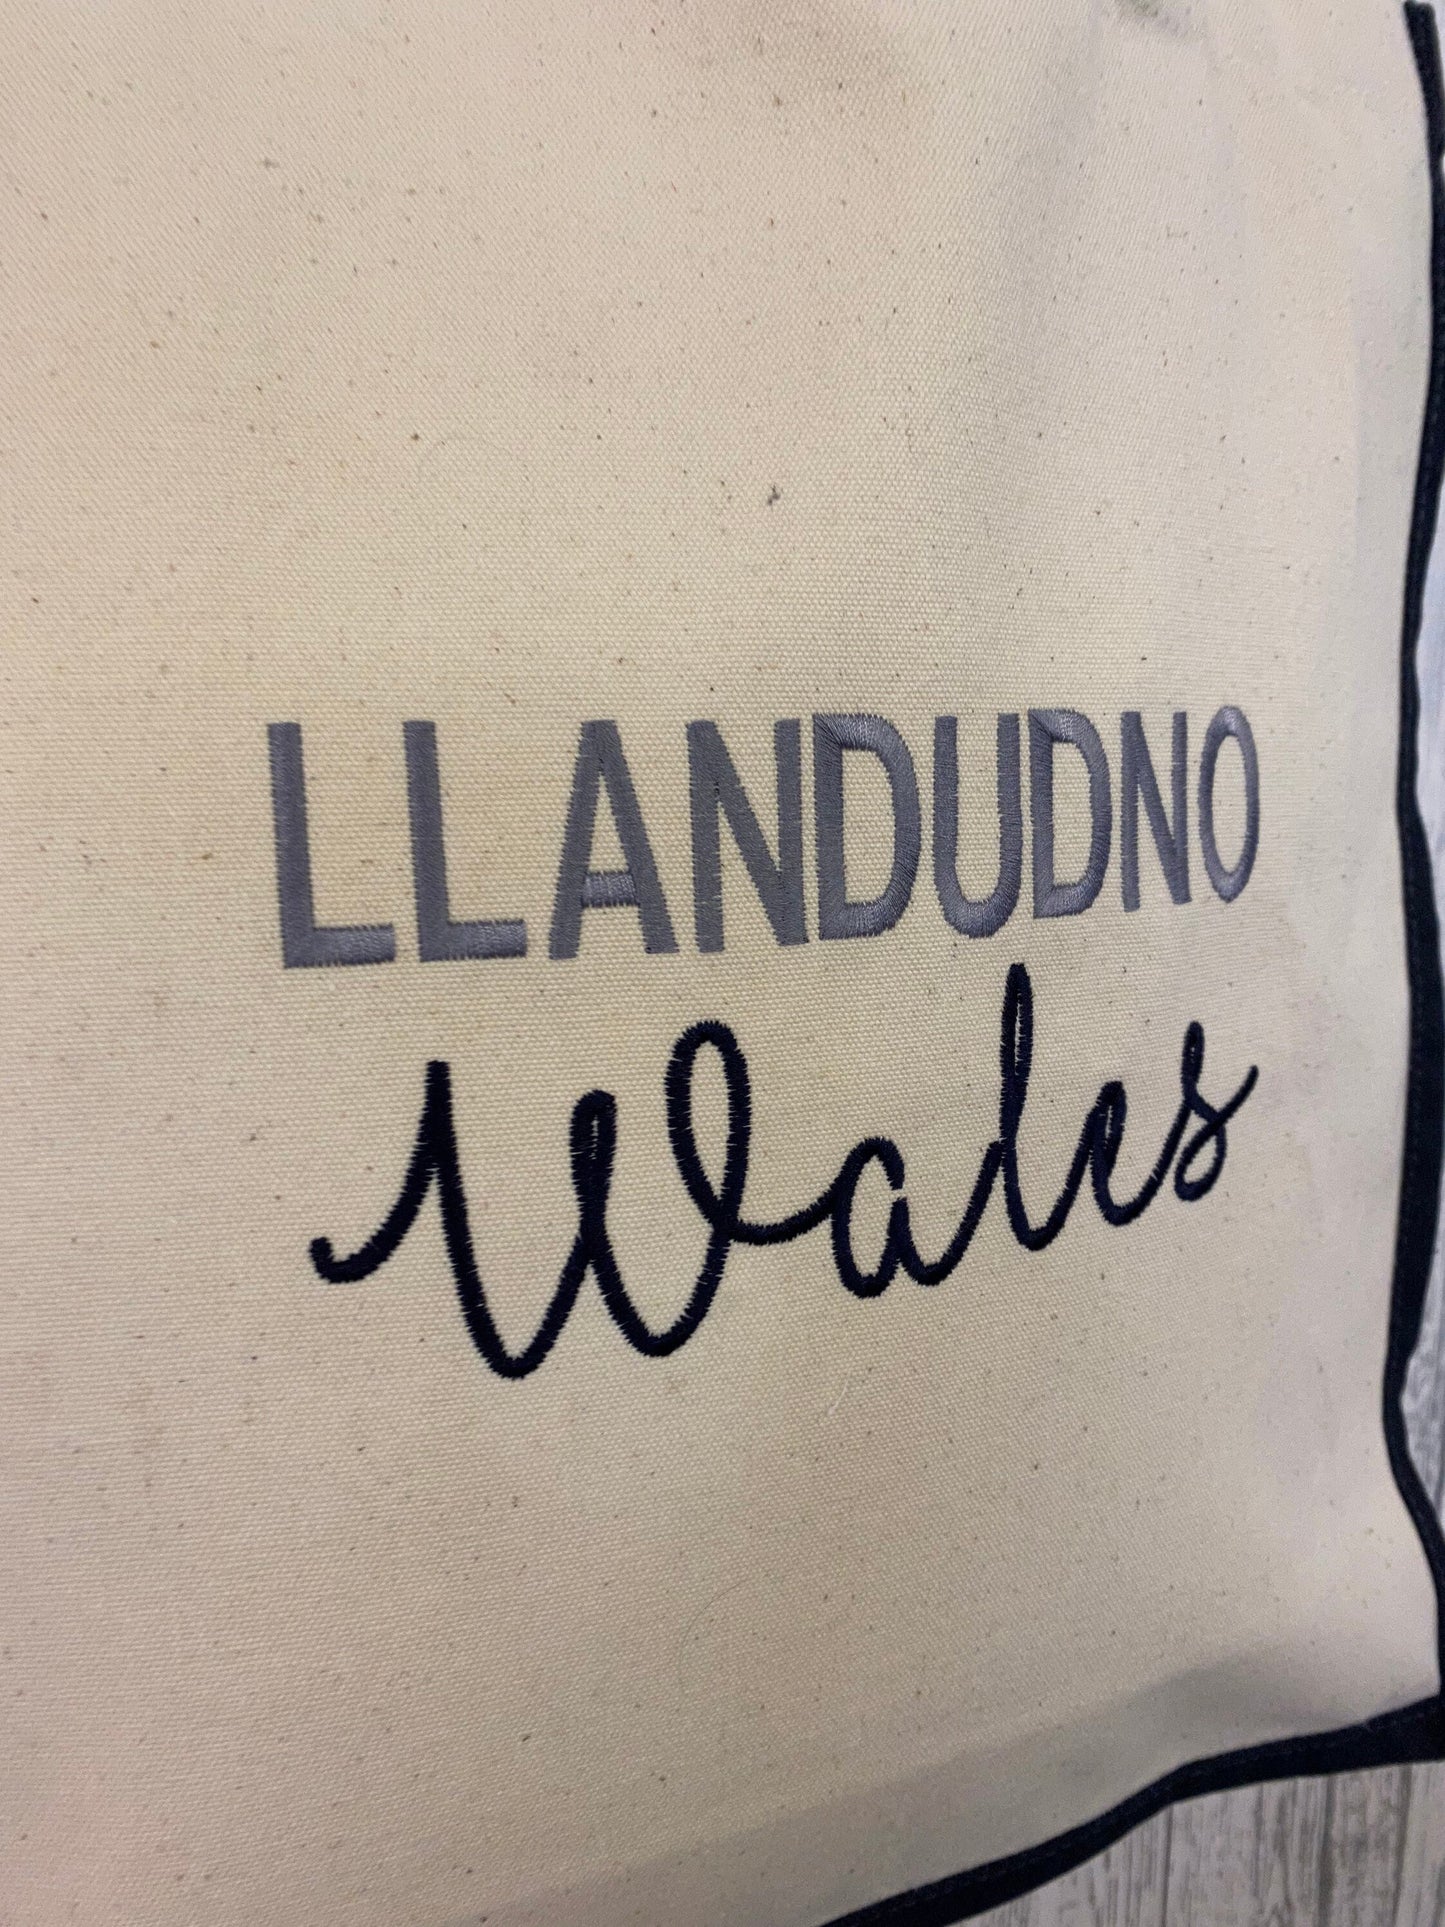 Location shopper tote bag Llandudno Wales large canvas shopper cream with navy blue sides and handles and embroidered lettering